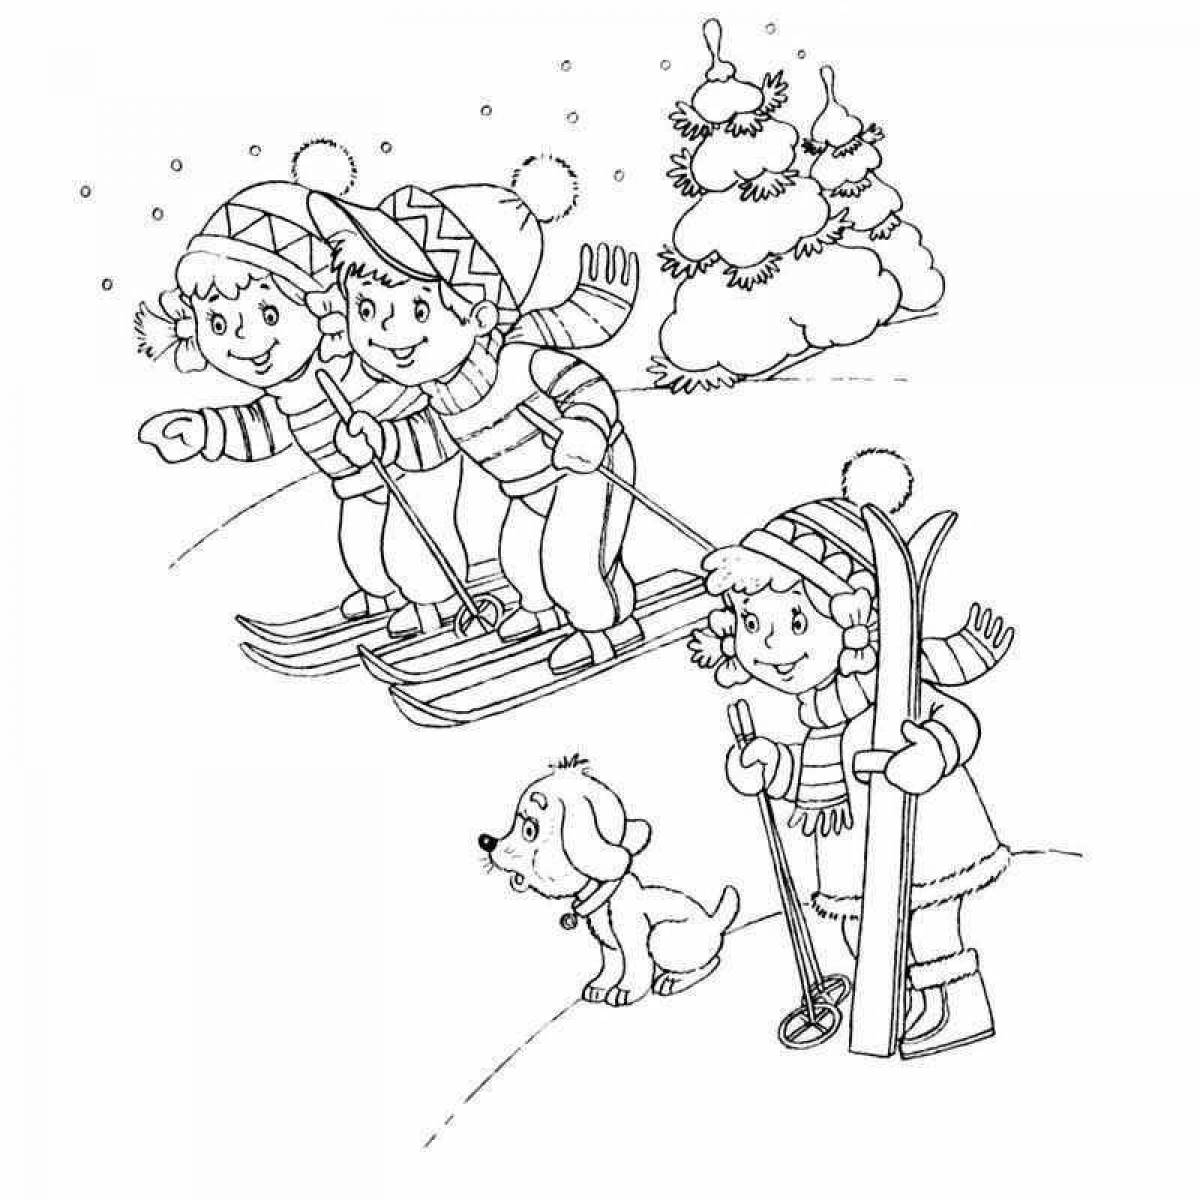 Exciting winter games coloring book